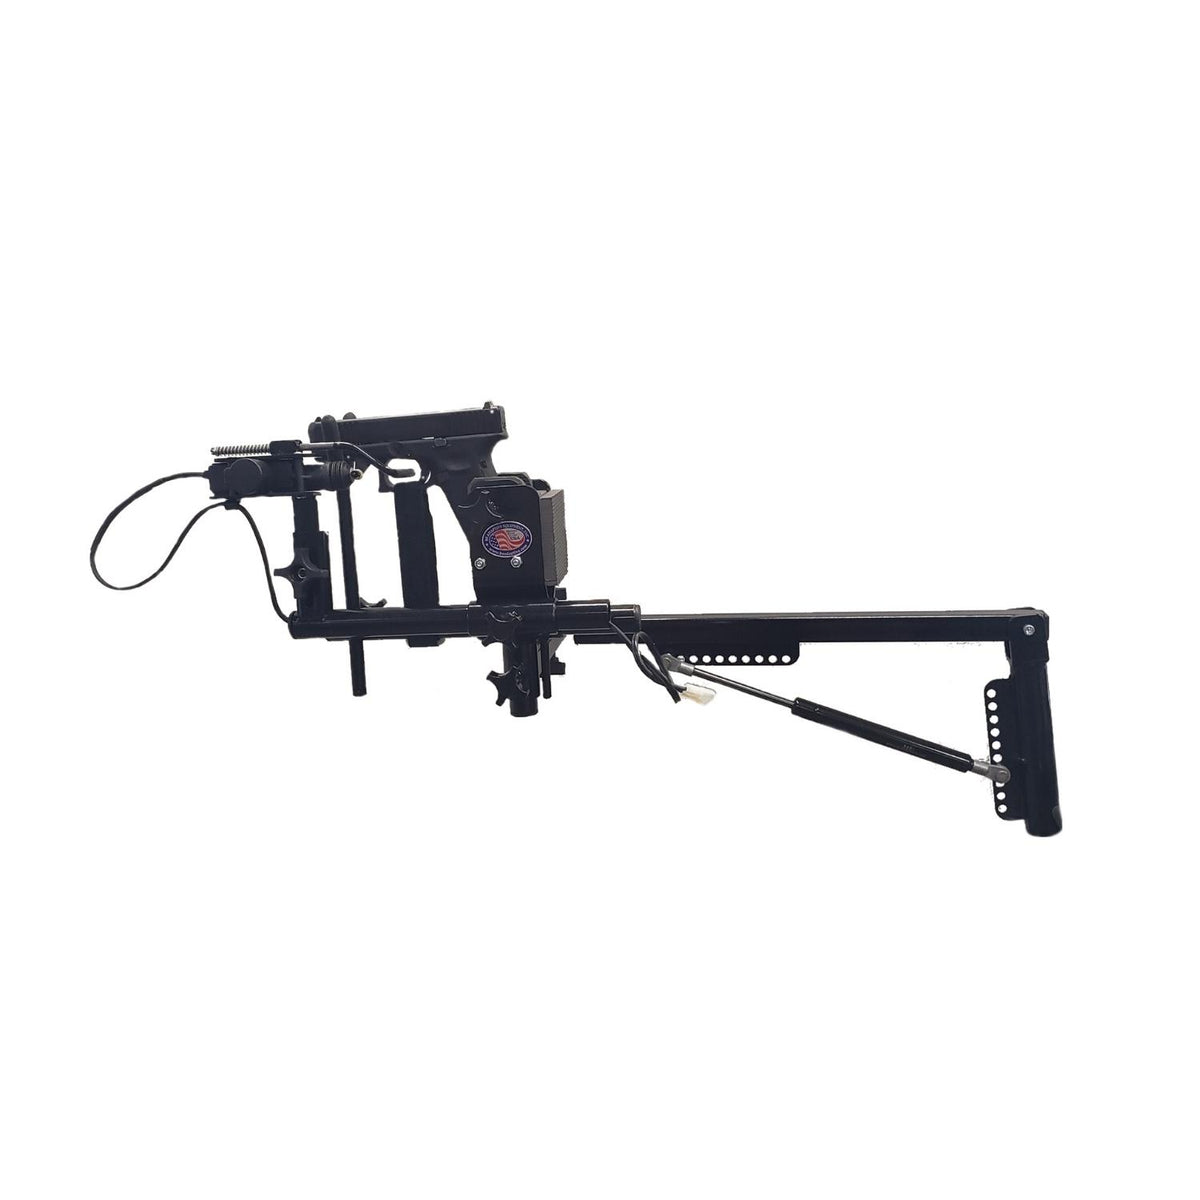 Pistol Mount Add-on for Sharpshooter Limited Arm Mobility Gun Mount